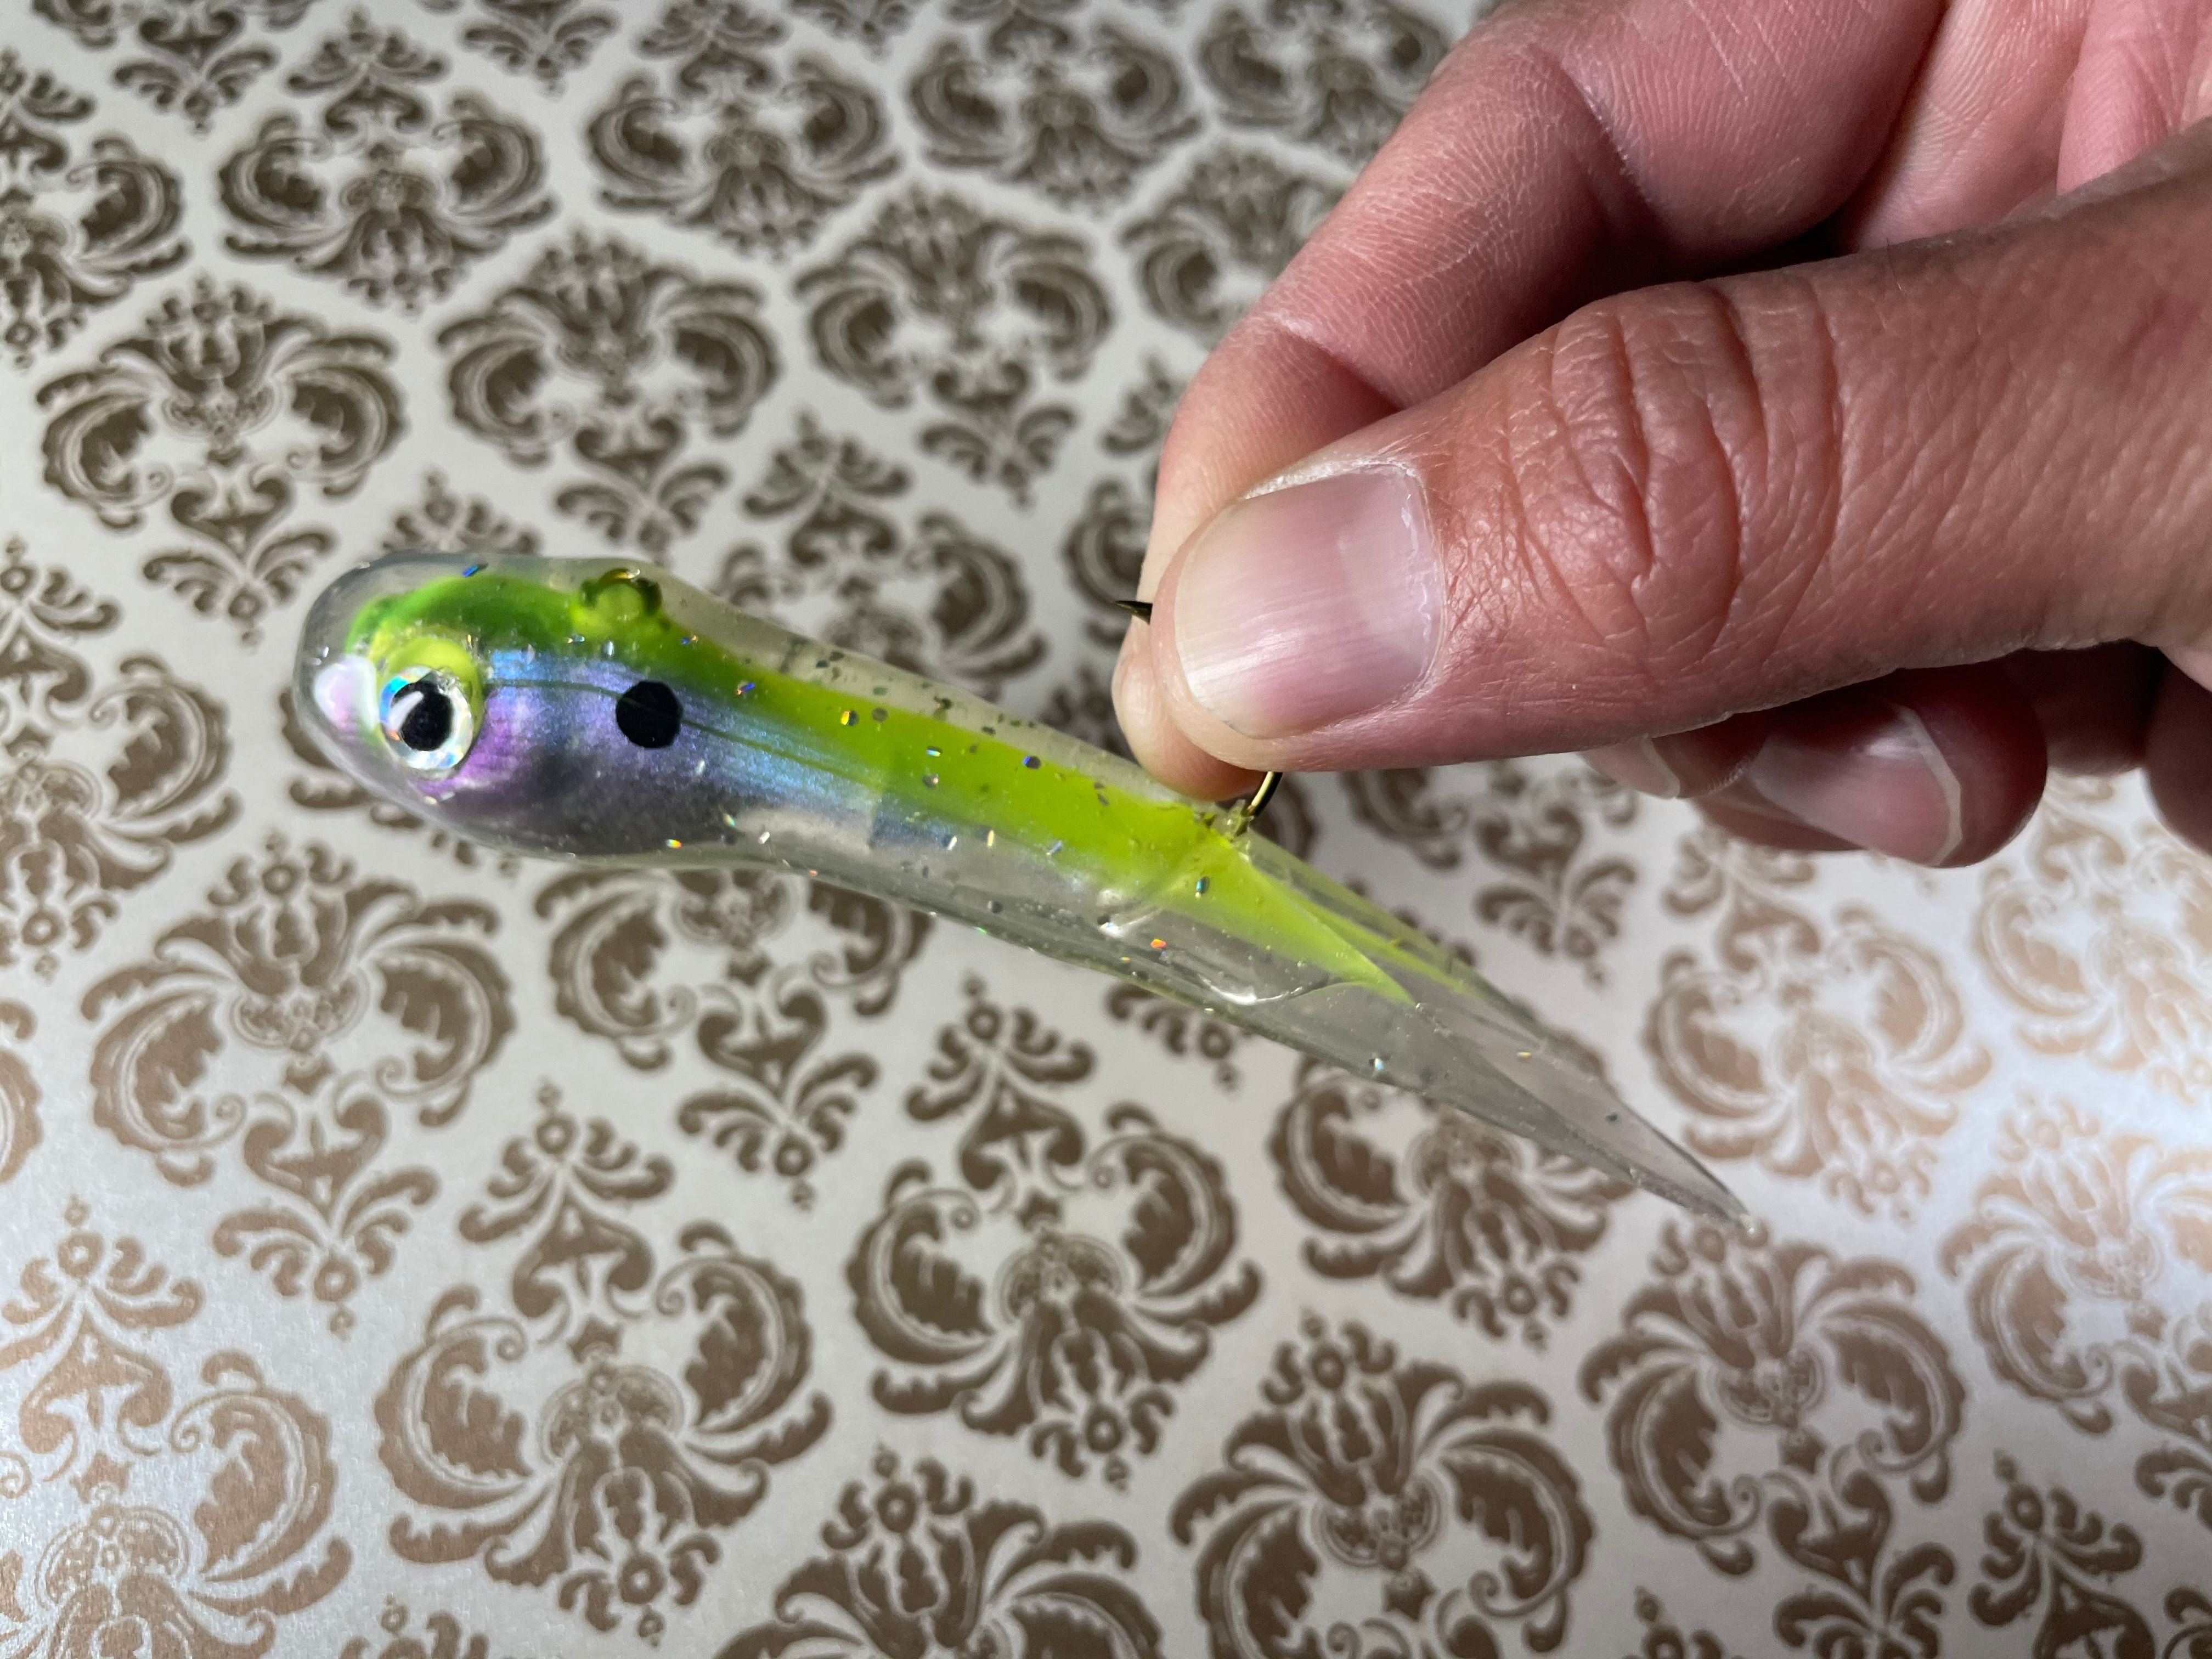 Cloudy-ish baits - Possibly from natural finger oils? - Soft Plastics -   - Tackle Building Forums